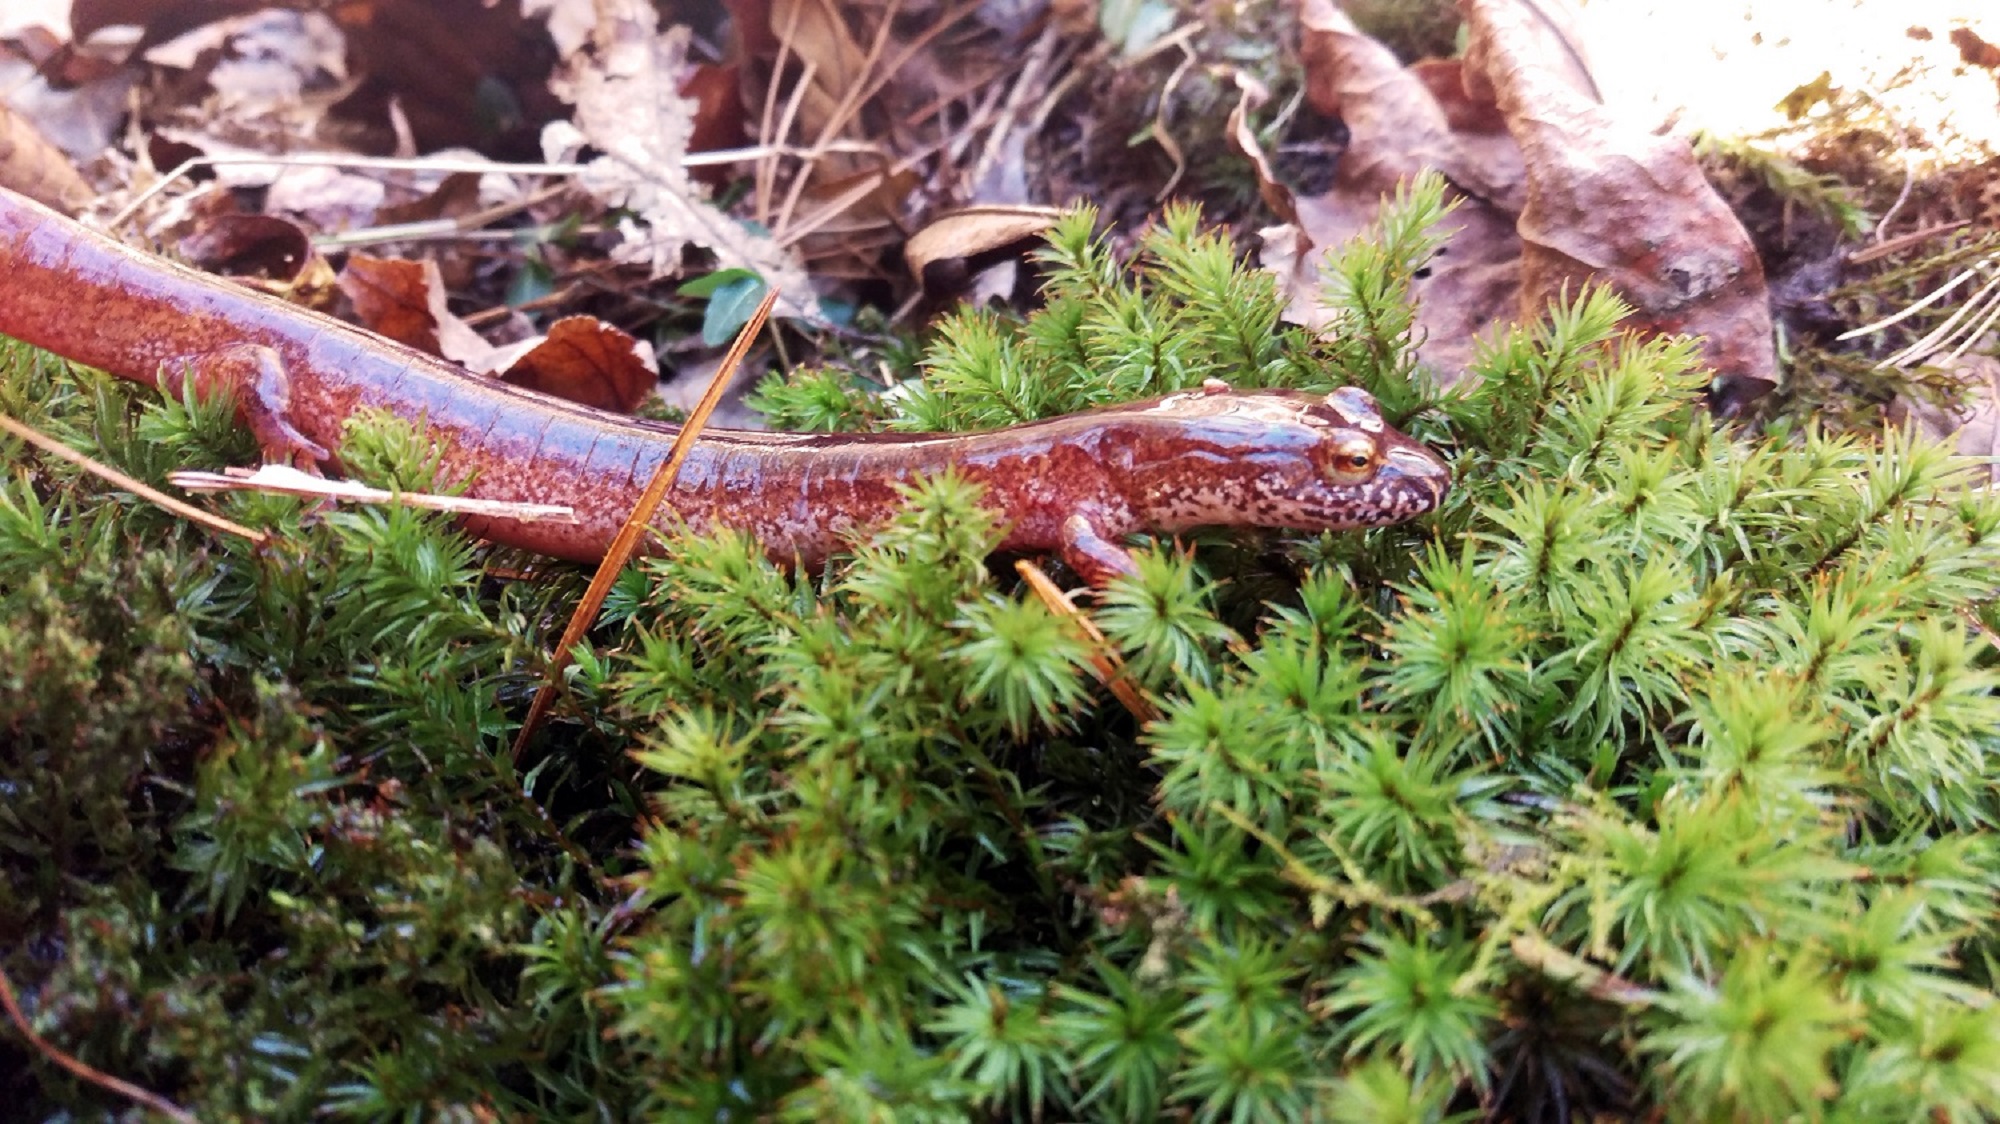 A Spring Salamander, pictured, is one of several salamander species being used in a series of experiments analyzing how climate change affects sensitive aquatic species